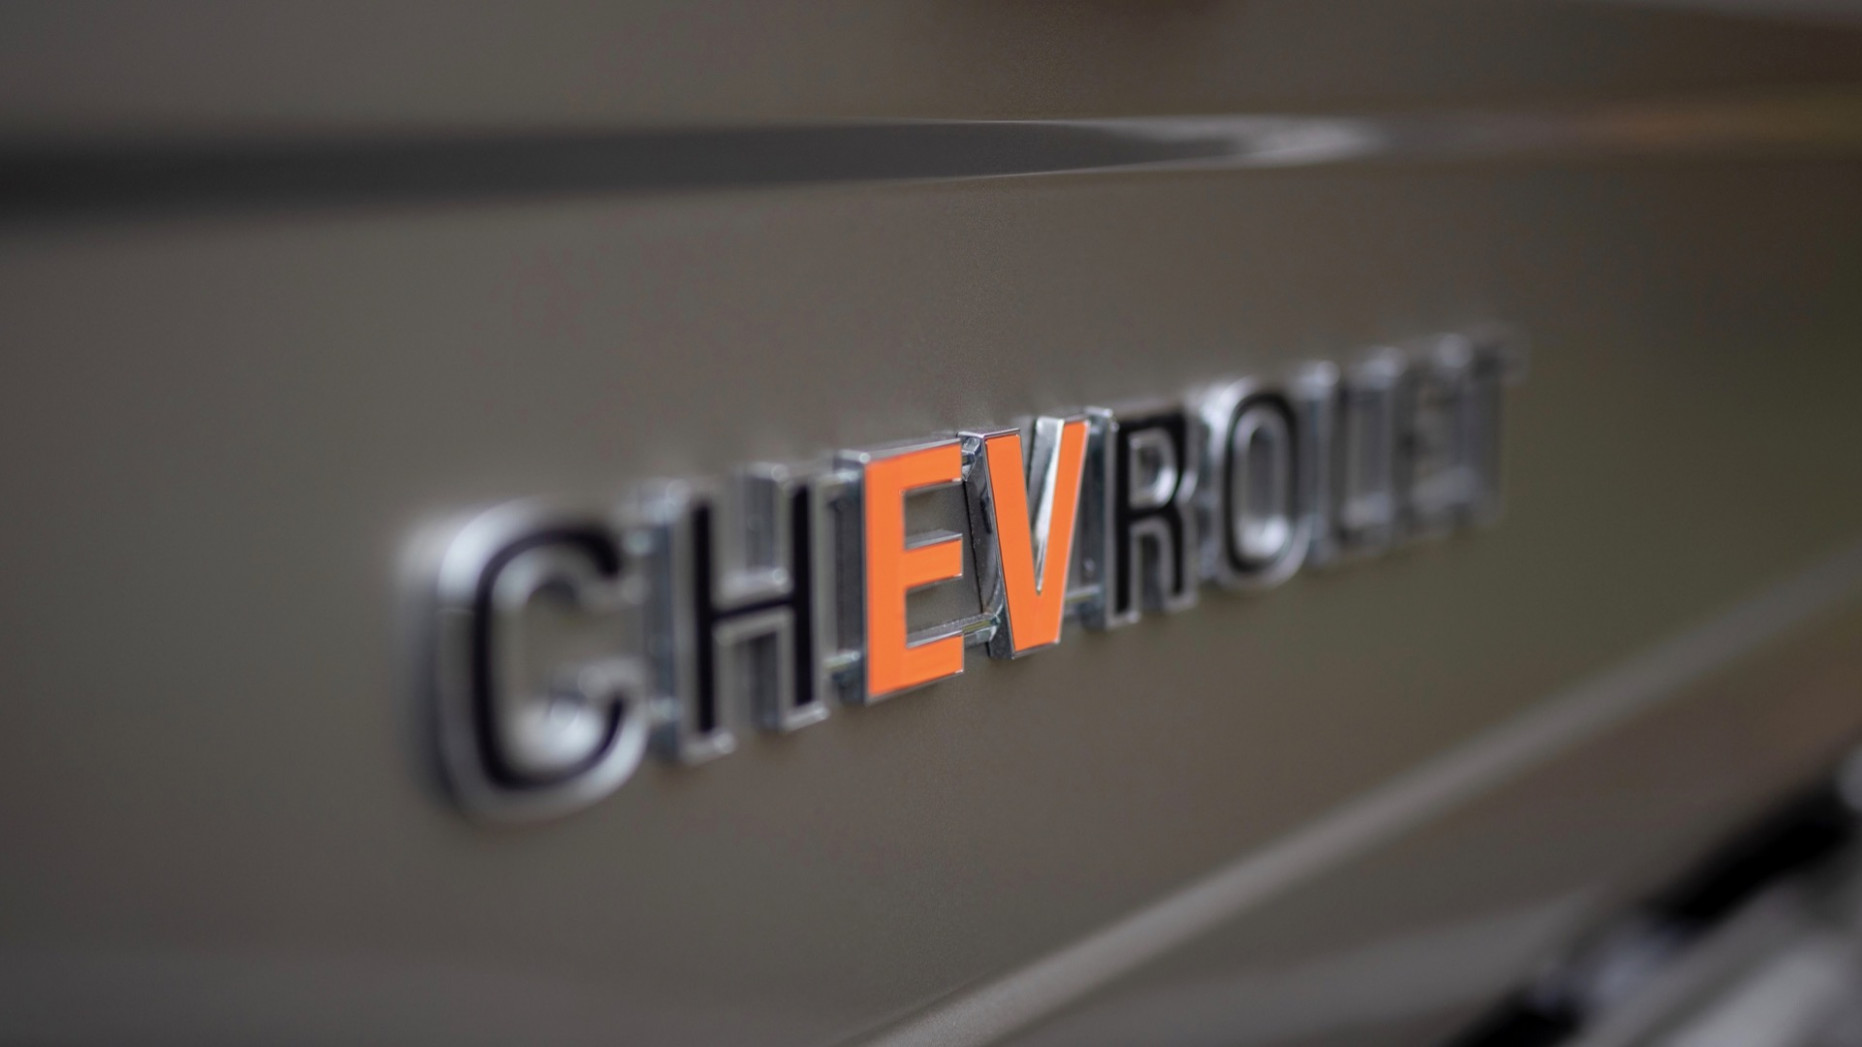 Chevy makes all-electric classic Blazer SUV to show off upcoming